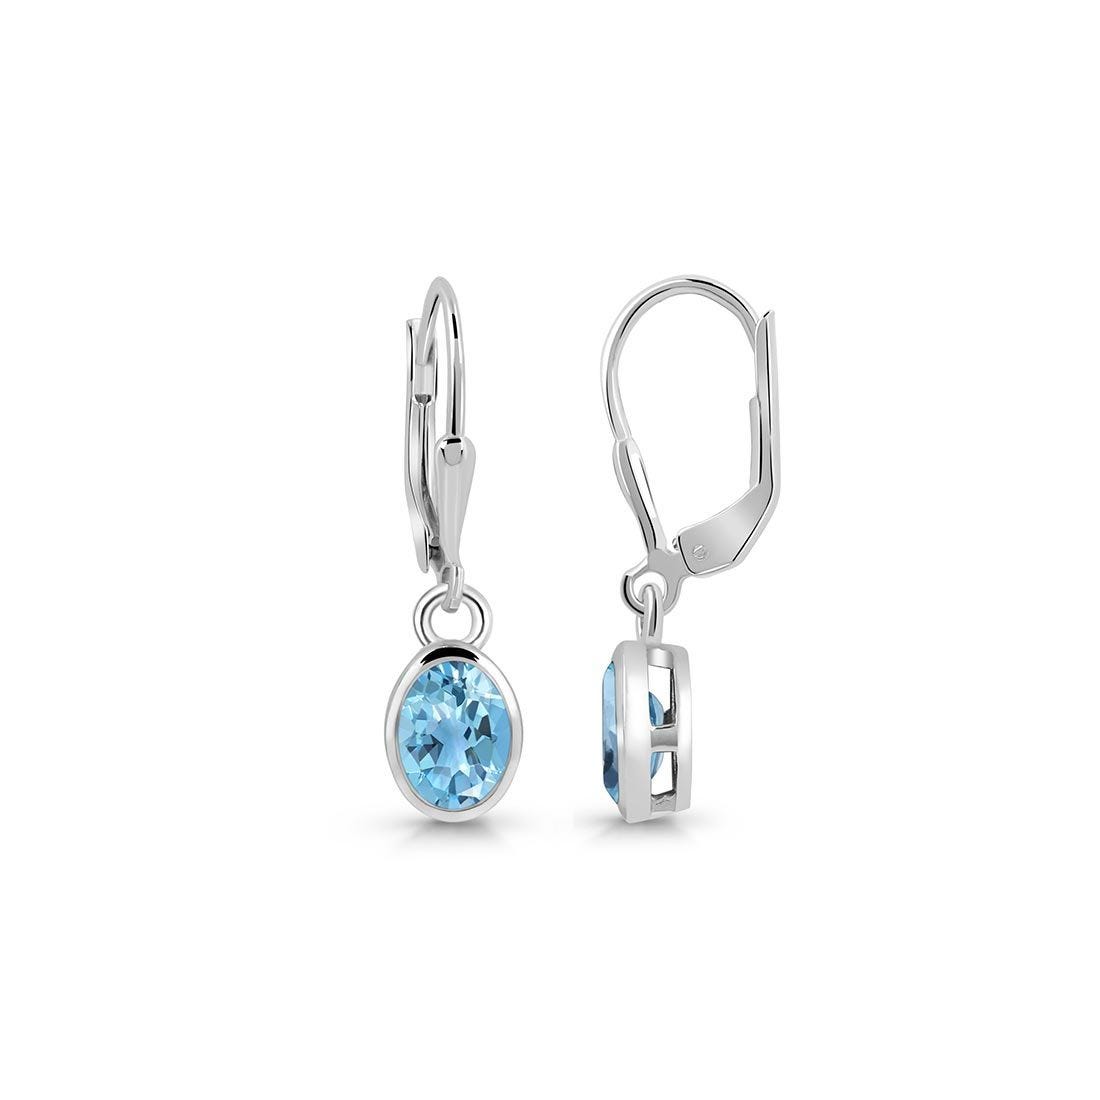 Sky Blue Topaz Jewelry: Adding a Touch of Elegance to Your Wardrobe ...